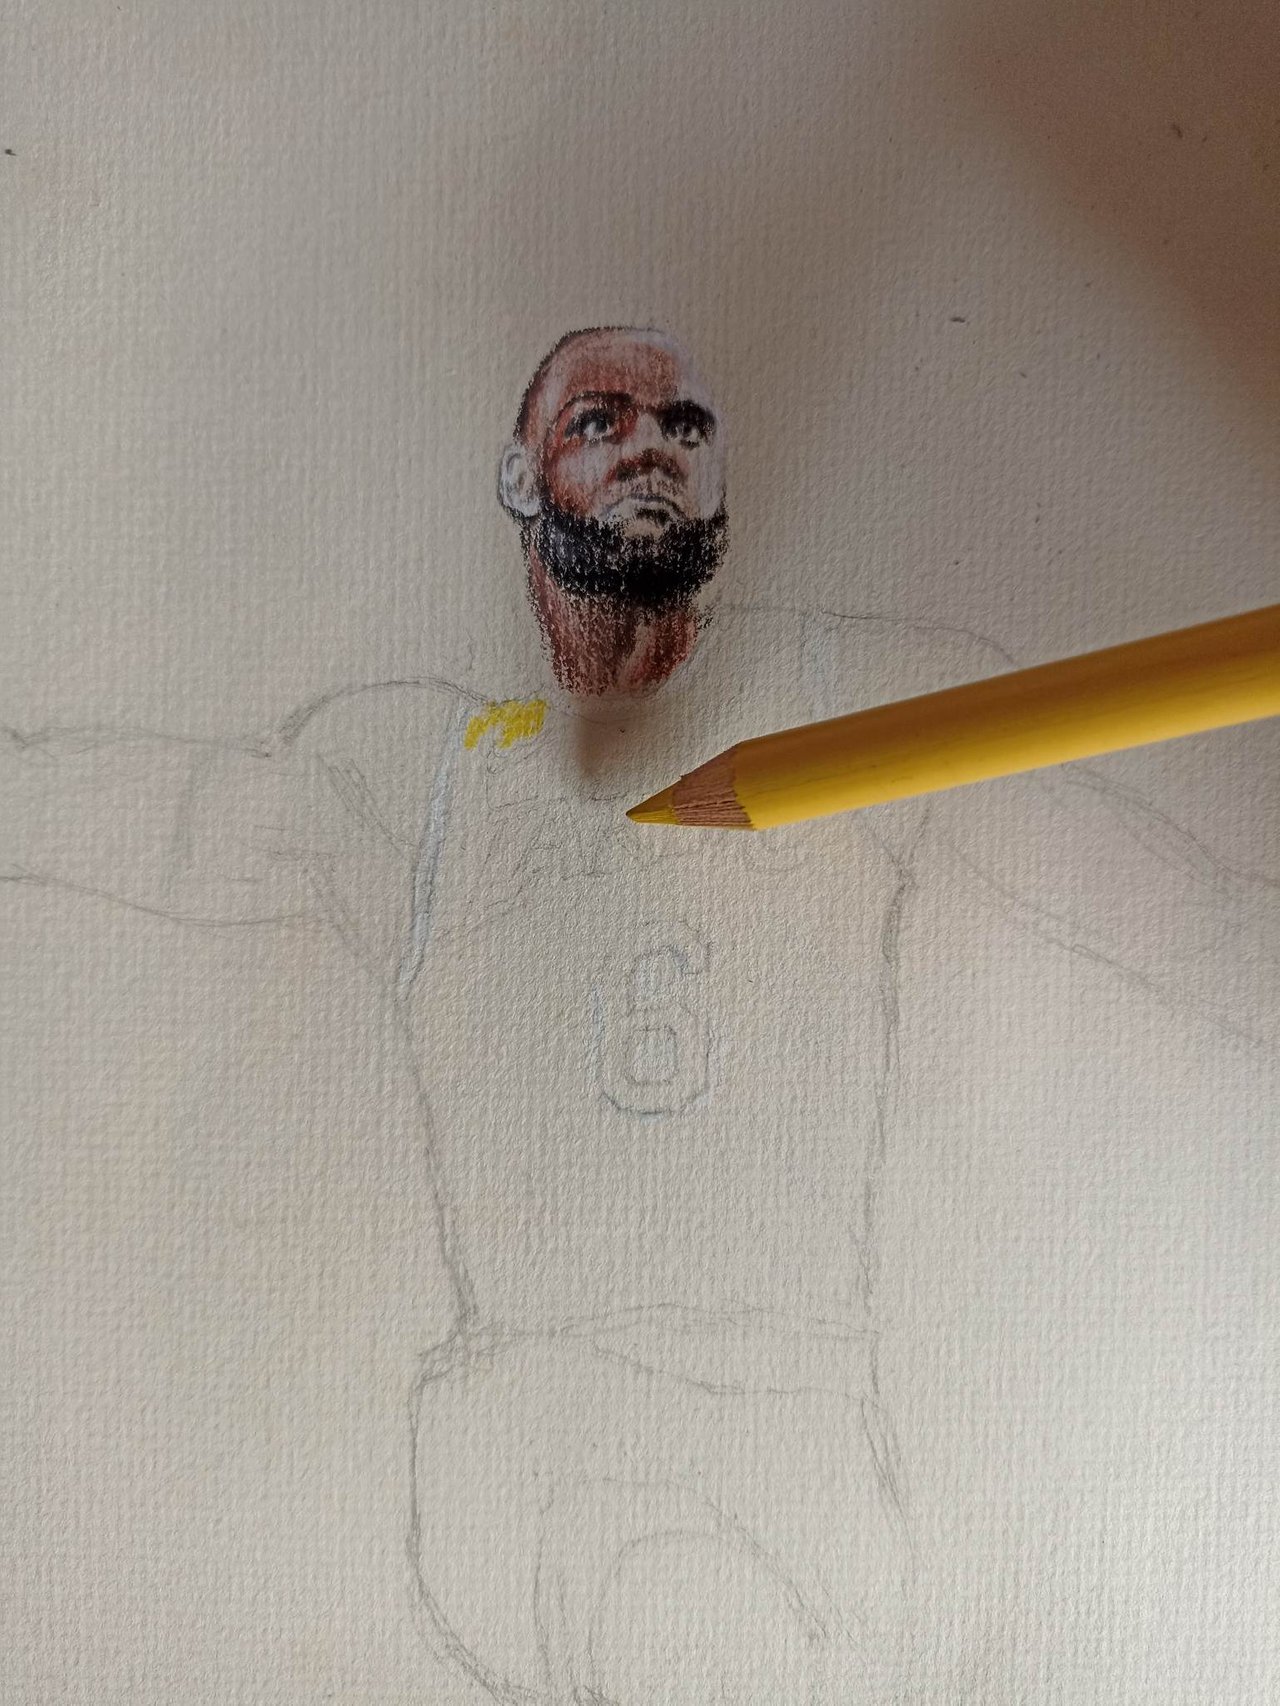 ENG-ESP] LEBRON JAMES DRAWING WITH COLORED PENCILS